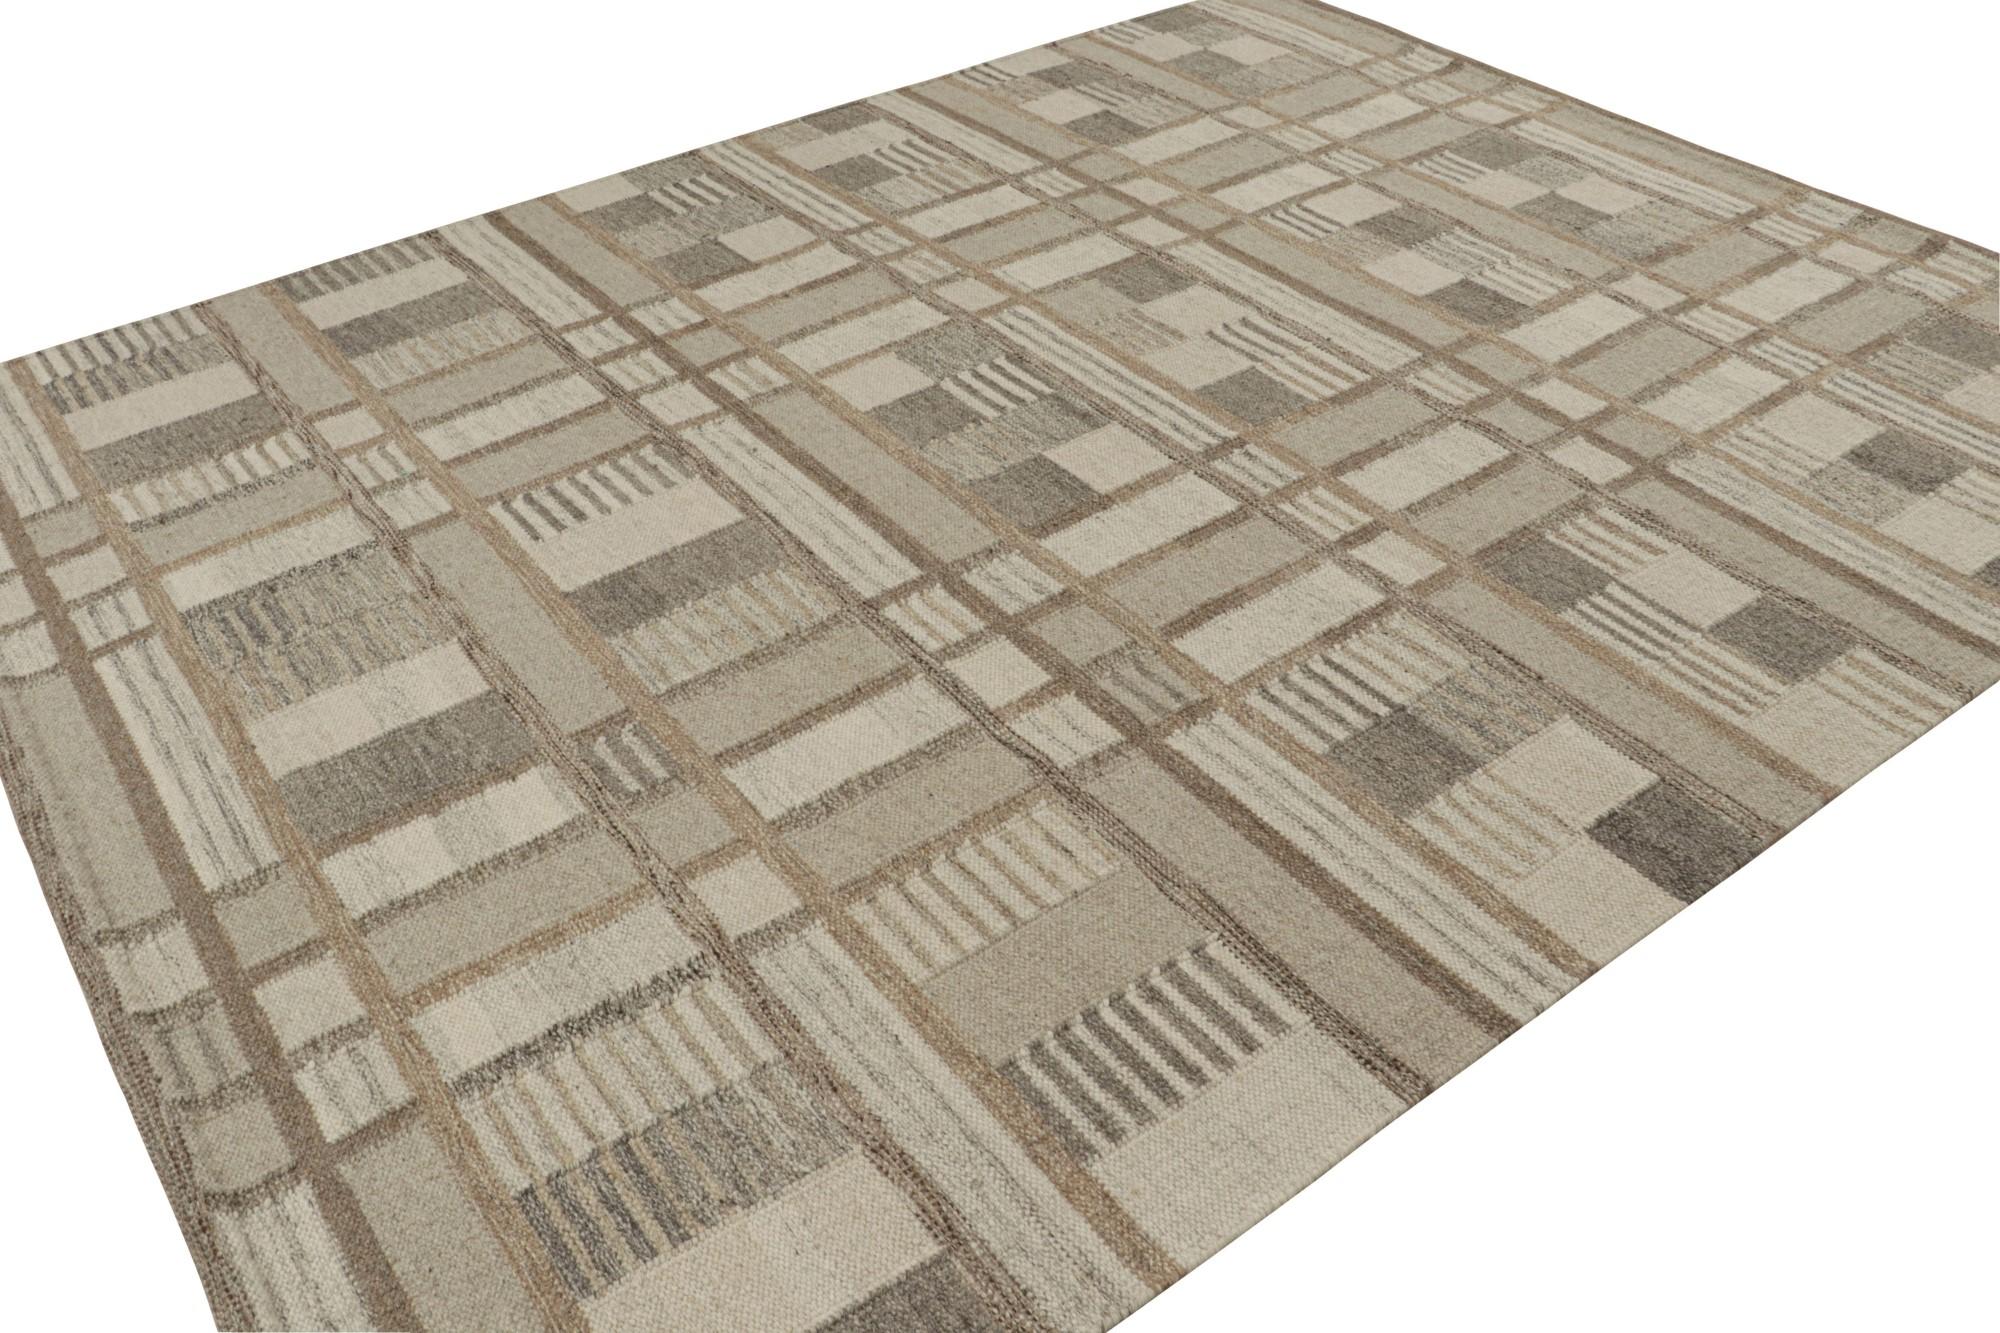 A smart 8x10 Swedish style kilim from our award-winning Scandinavian flat weave collection. Handwoven in wool, cotton & undyed natural yarns.

On the Design: 

This rug enjoys geometric patterns in grey, beige & brown. Keen eyes will admire undyed,